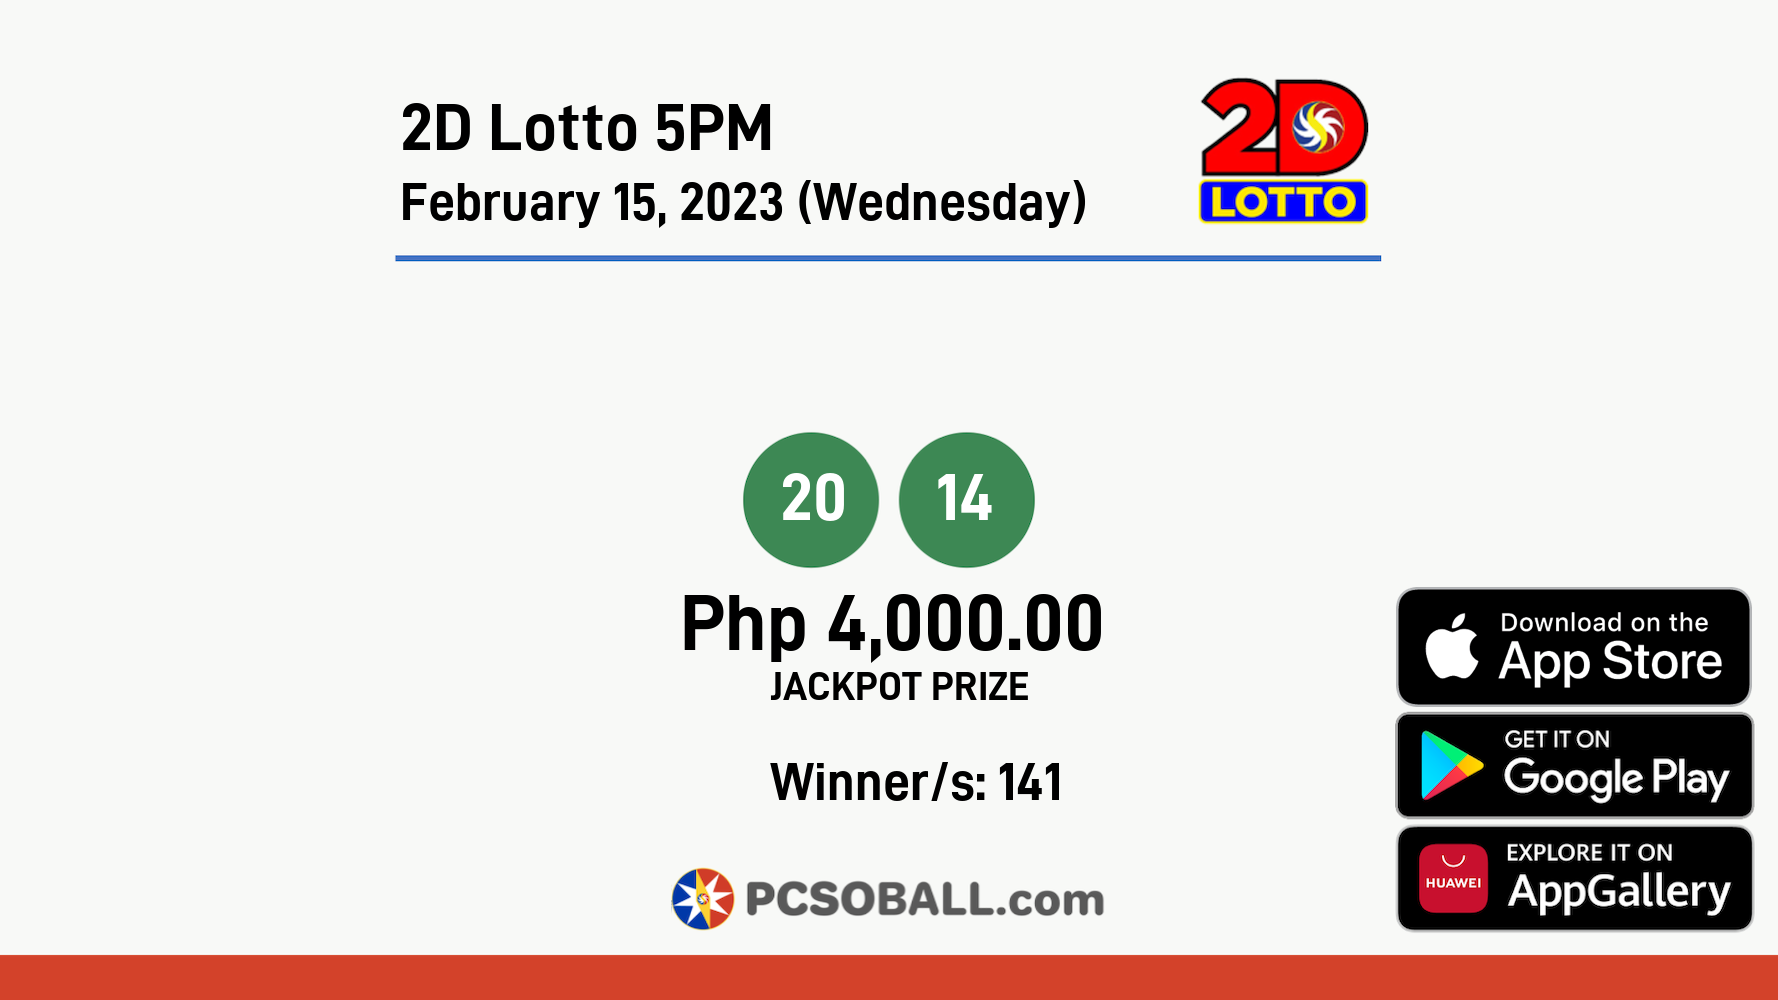 2D Lotto 5PM February 15, 2023 (Wednesday) Result